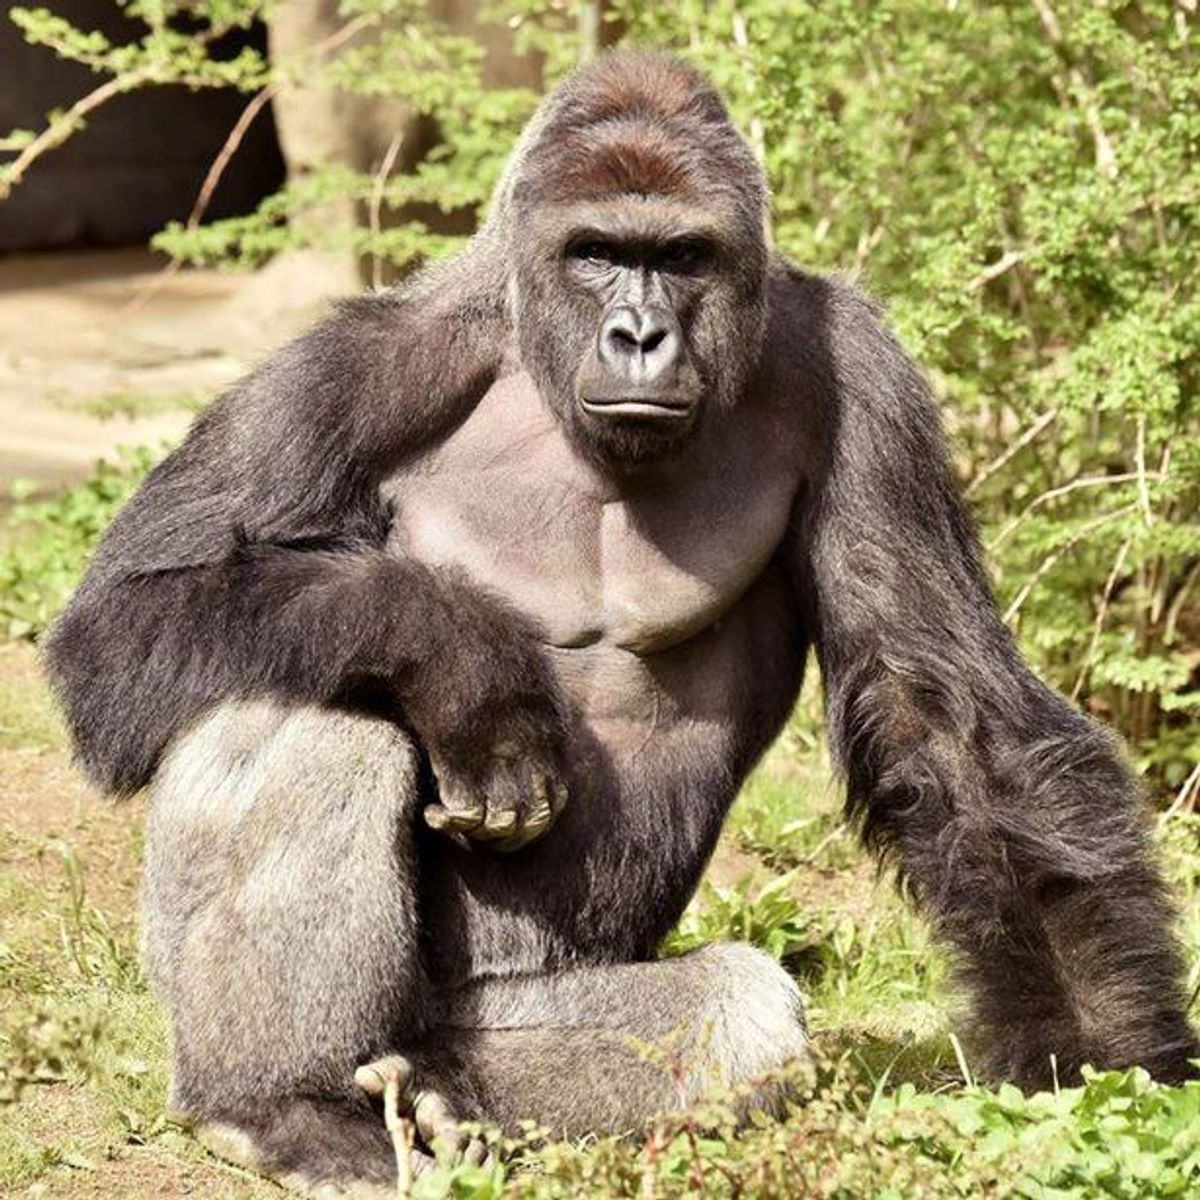 What We Should All Learn From Harambe's Death